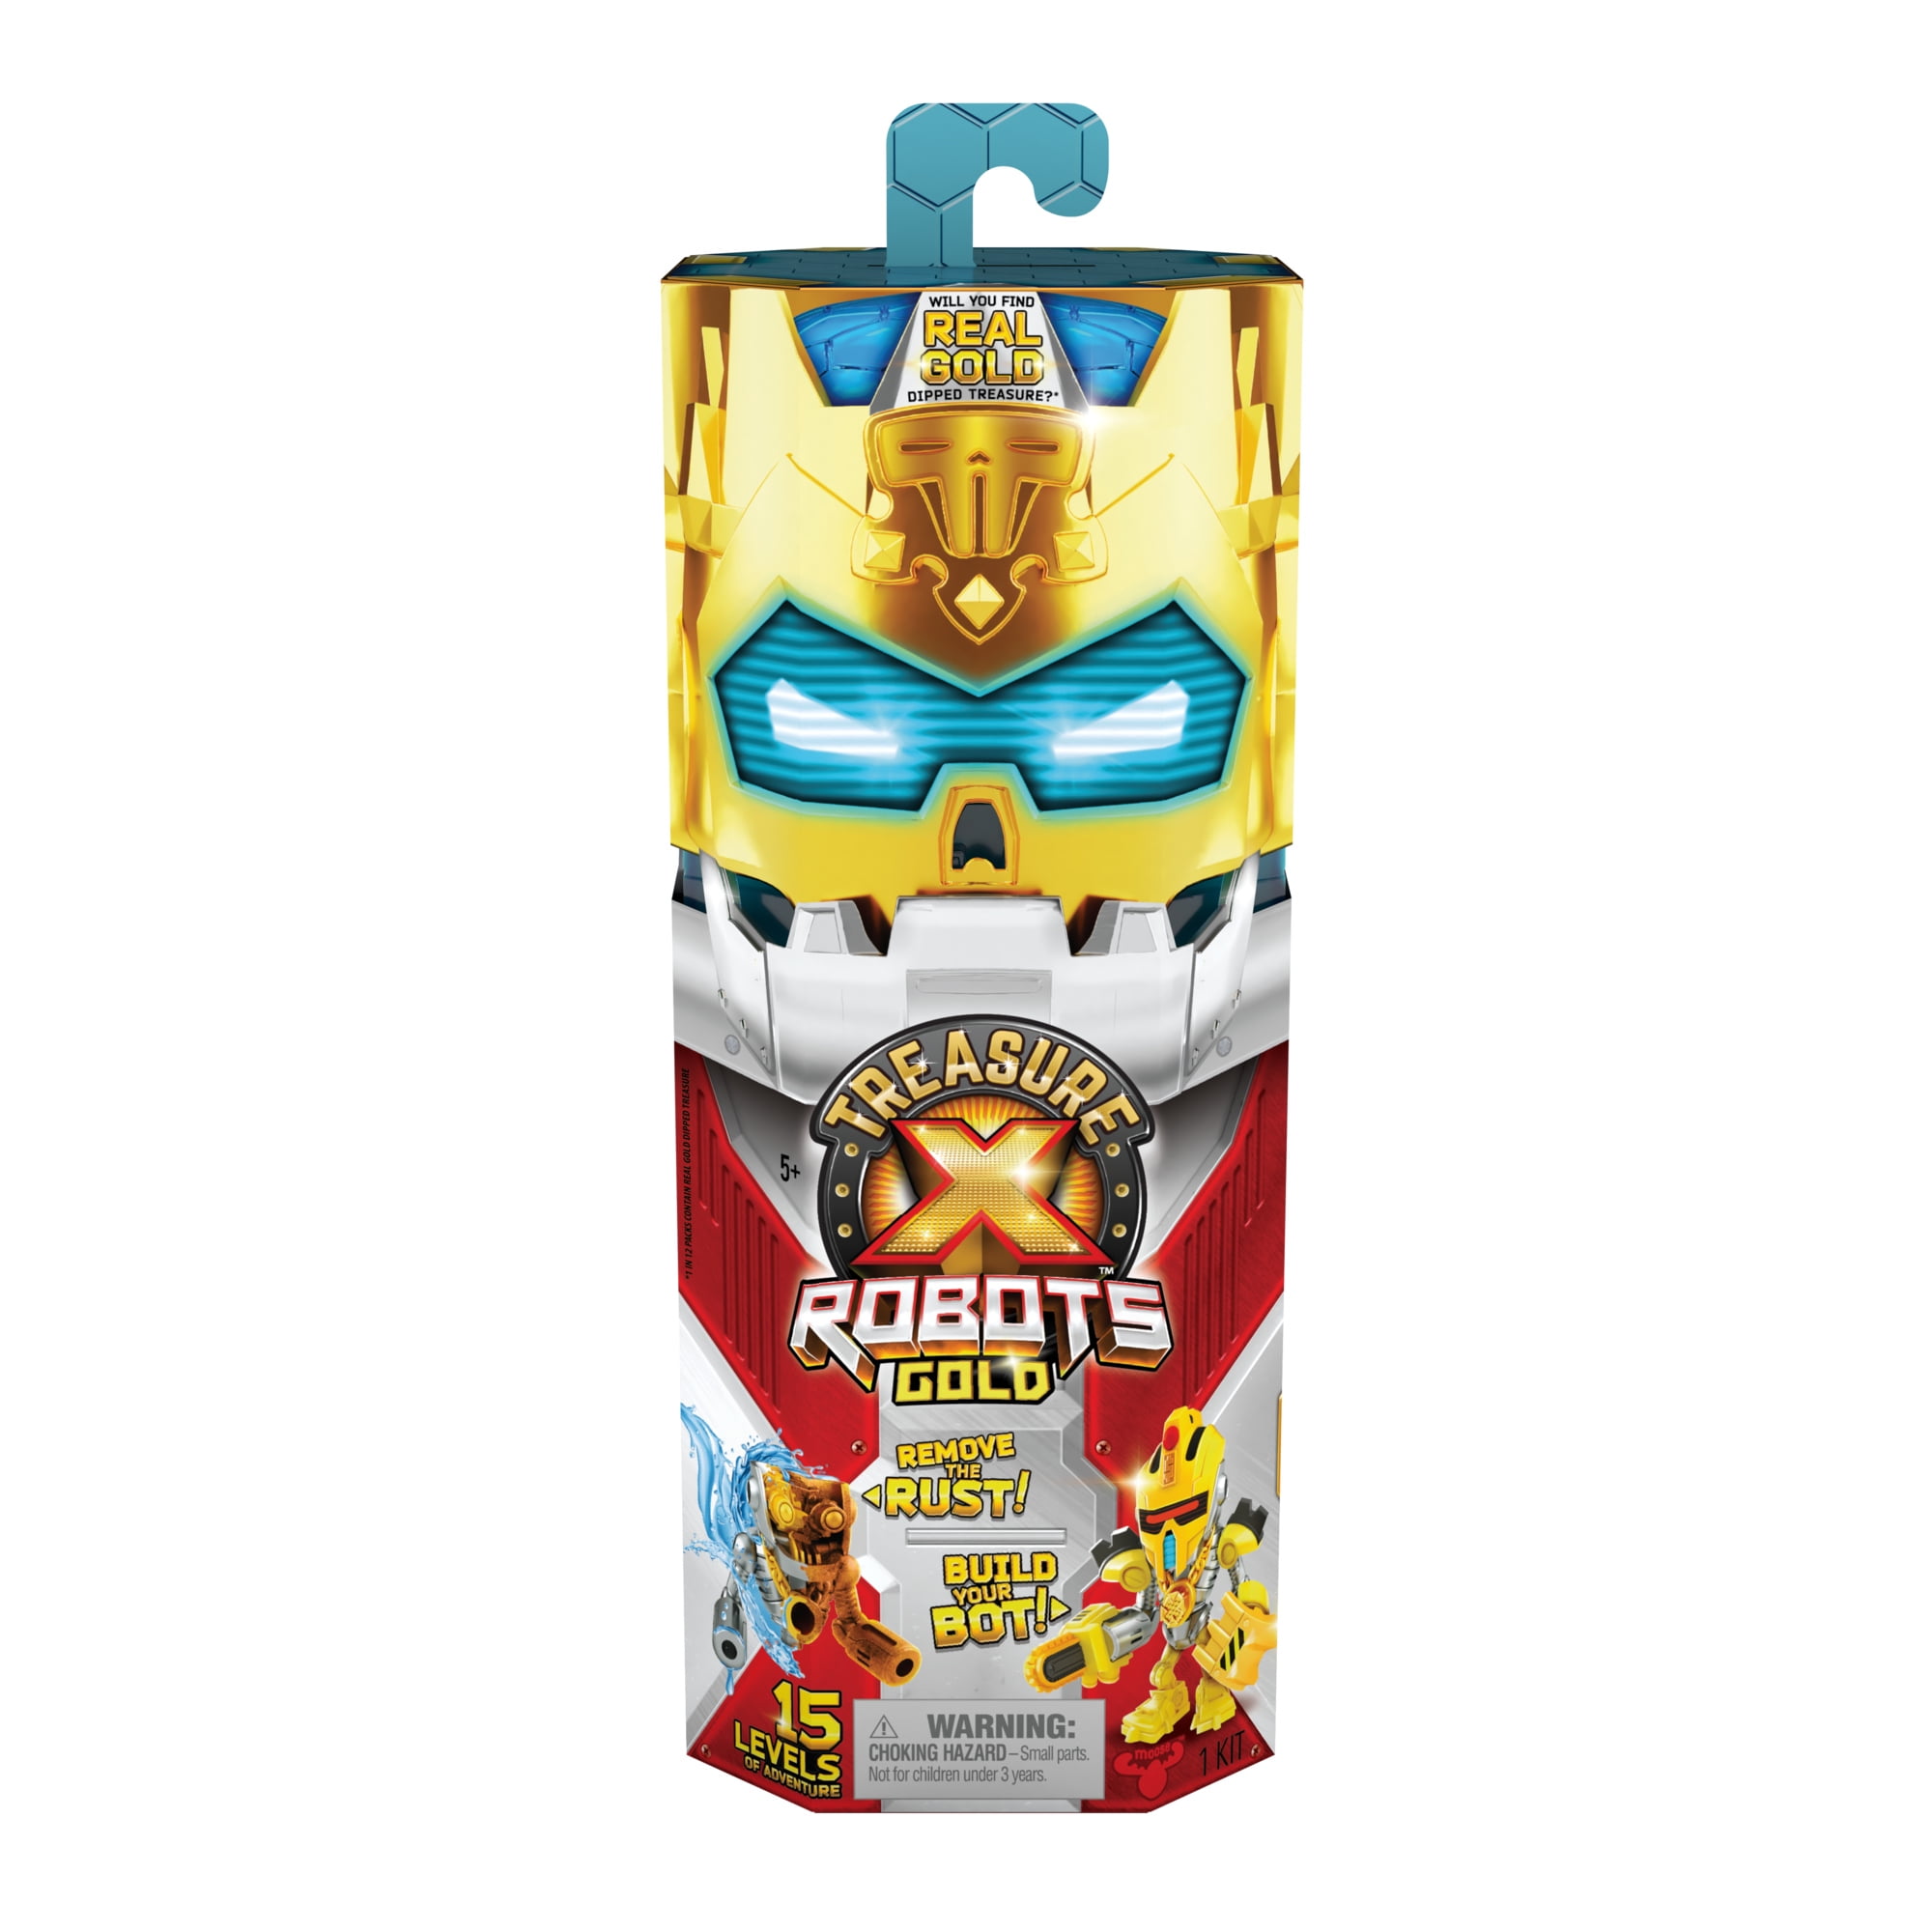 Treasure X Robots Gold - 6 Robots To Discover. Remove The Rust, Build Your Bot. 15 Levels Of Adventure. Will You Find Real Gold Dipped Treasure?, Boys, Toys For Kids, Ages 5+, Styles May Vary